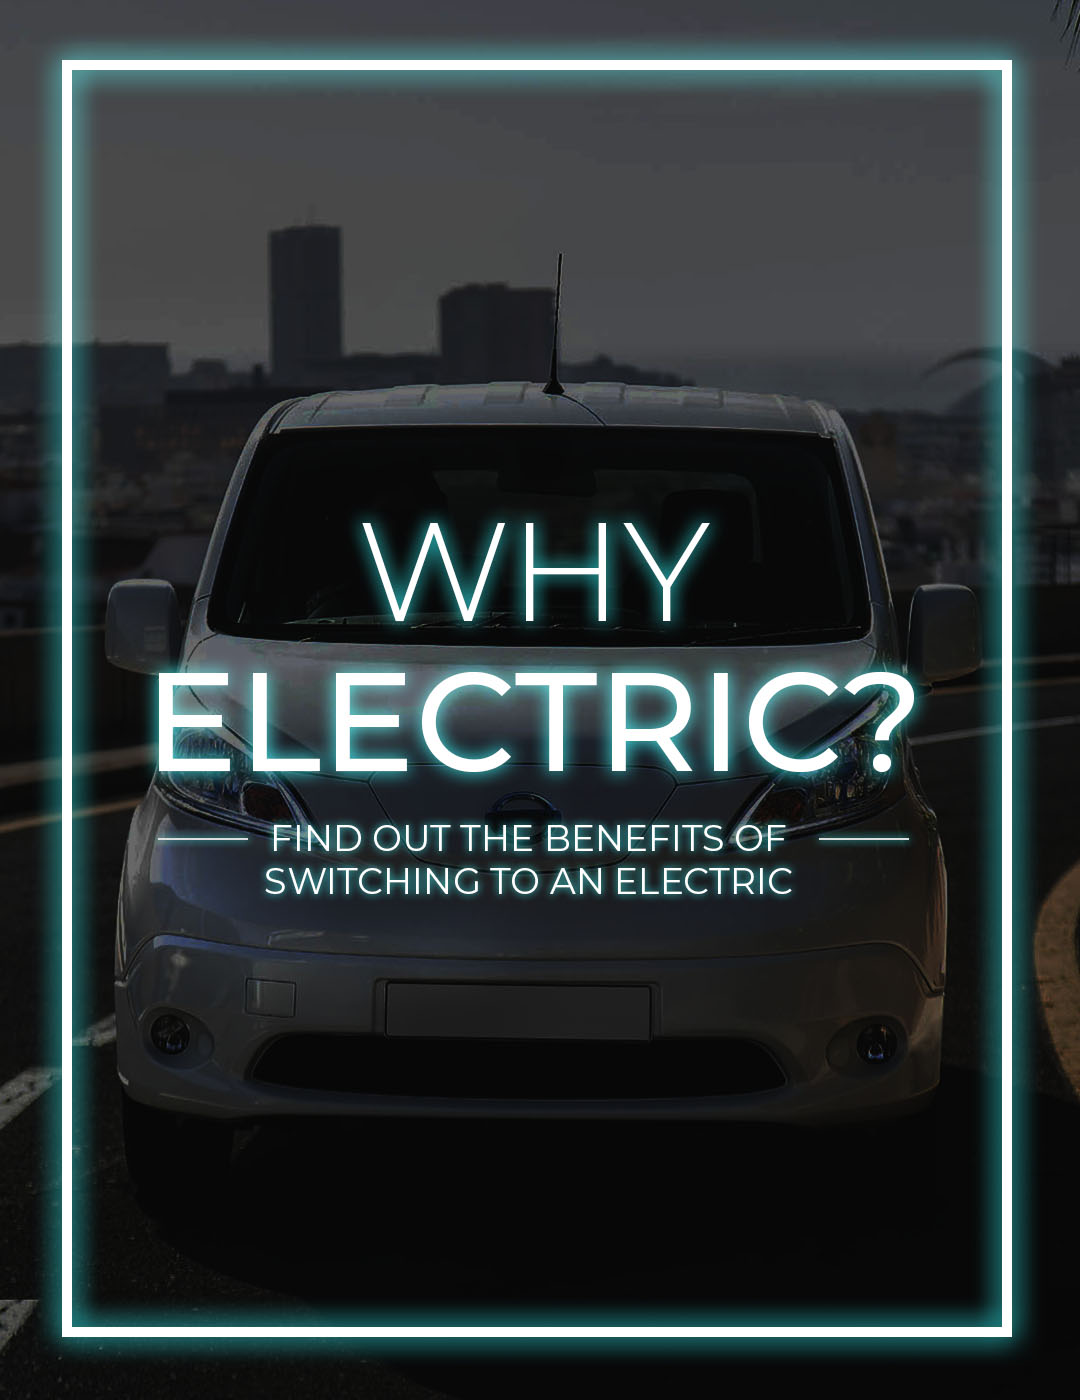 Why Electric? Mobile